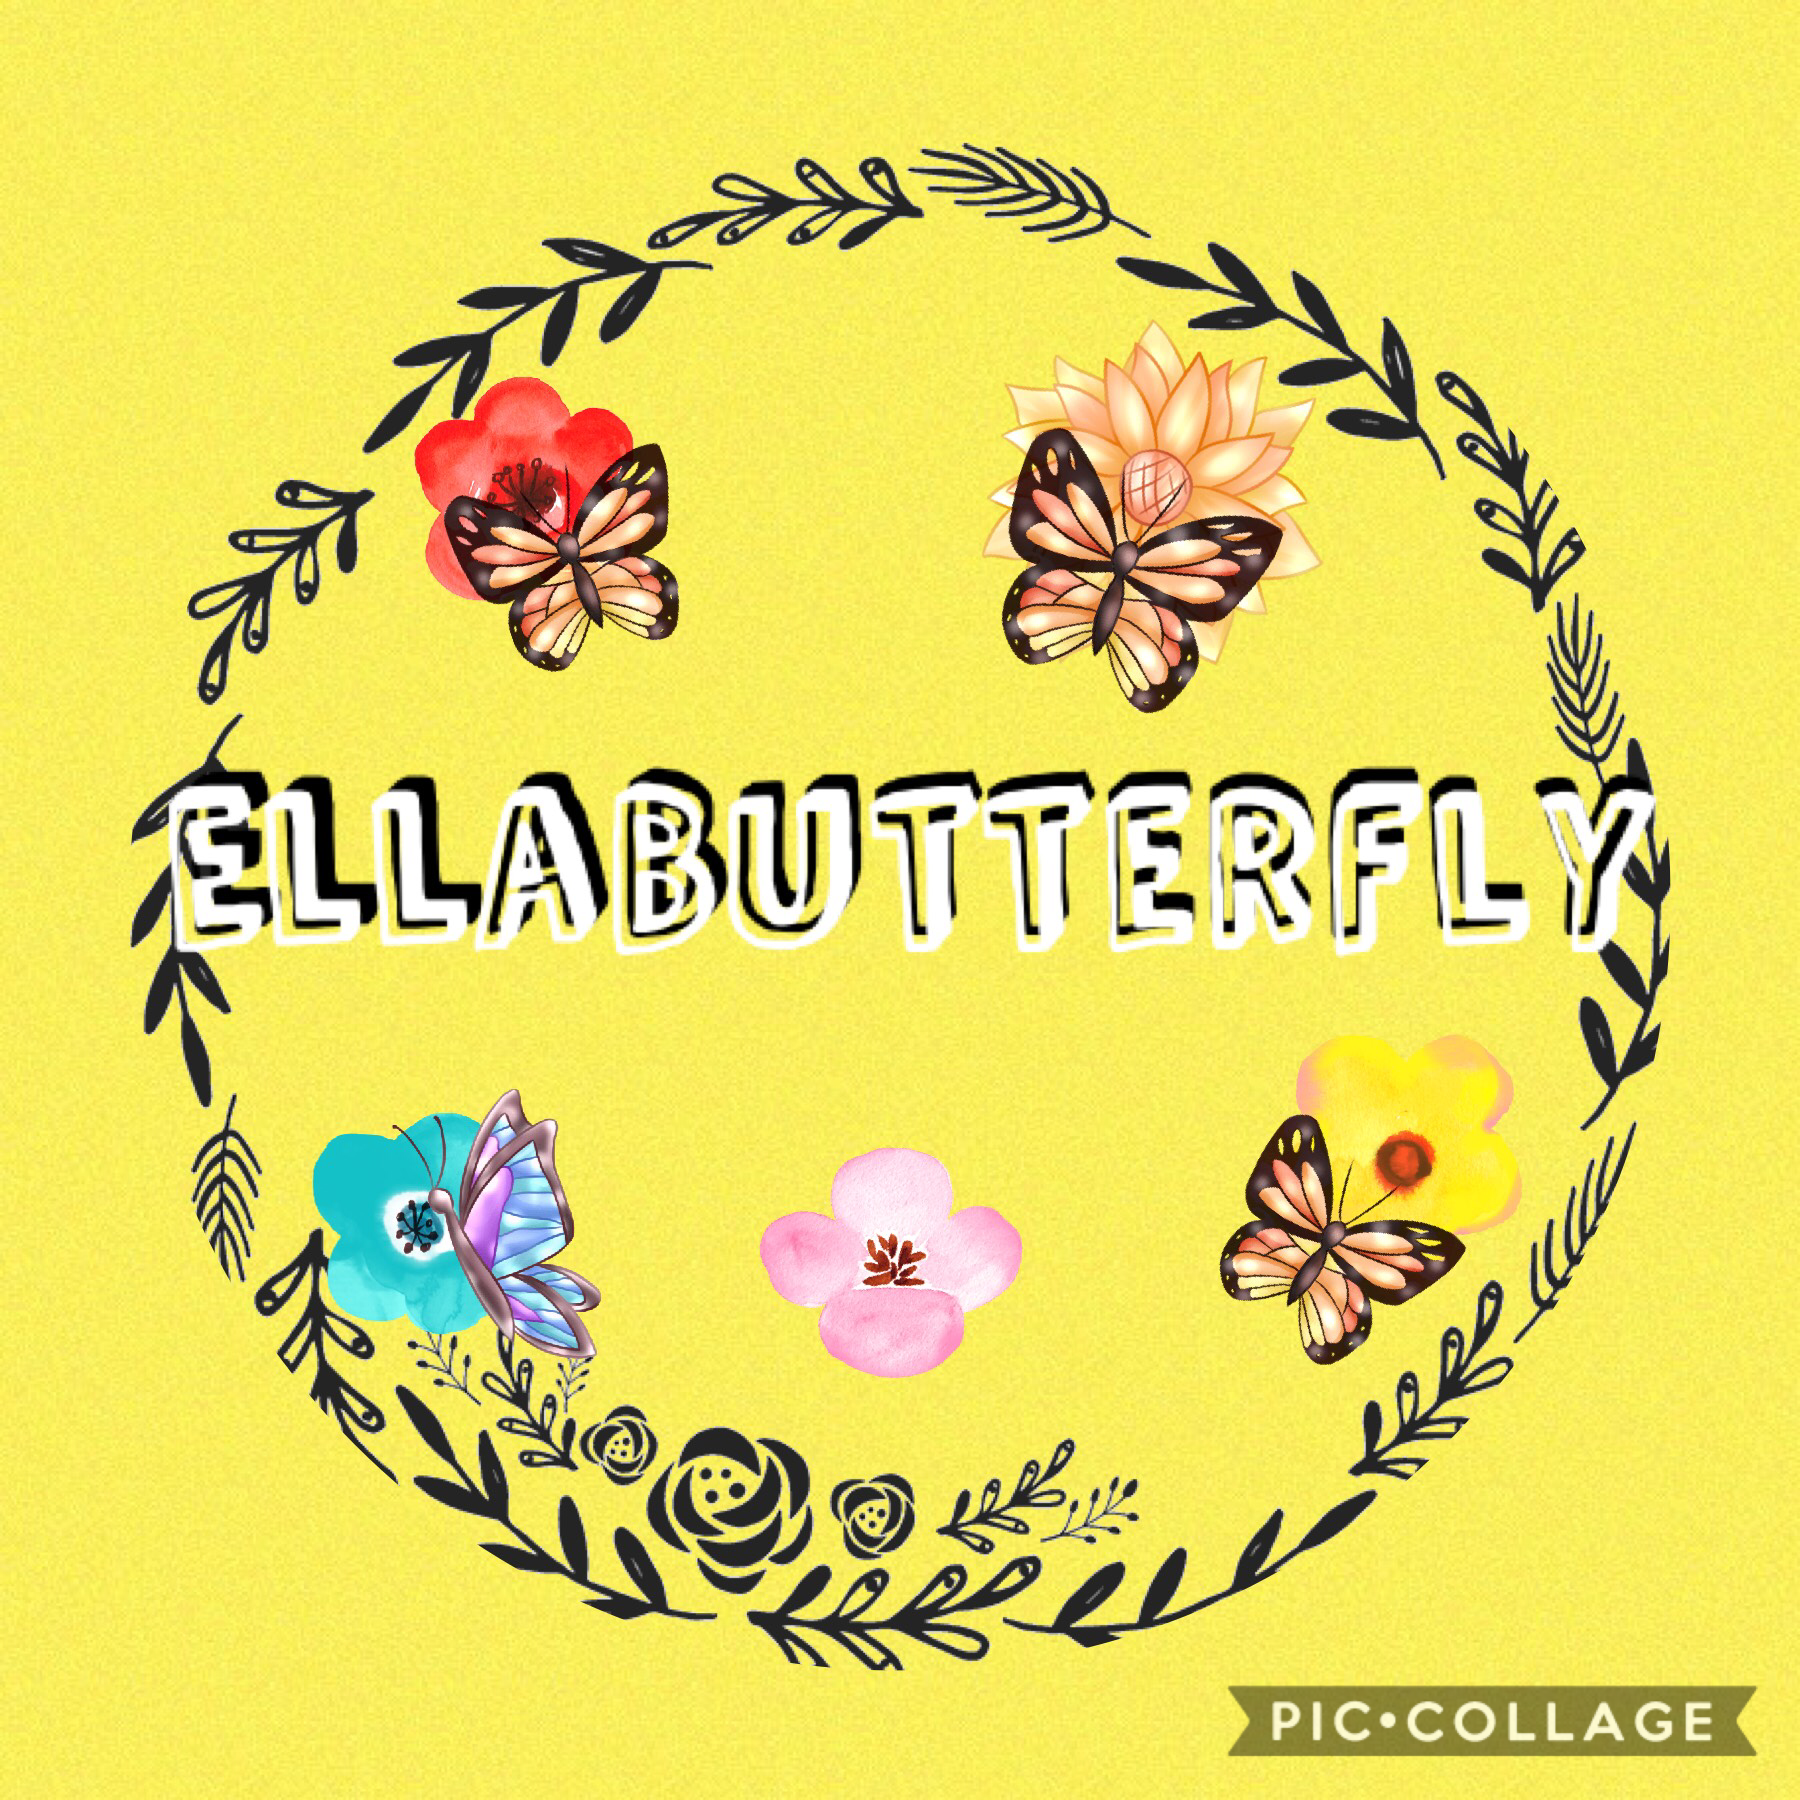 This is for EllaButterfly!